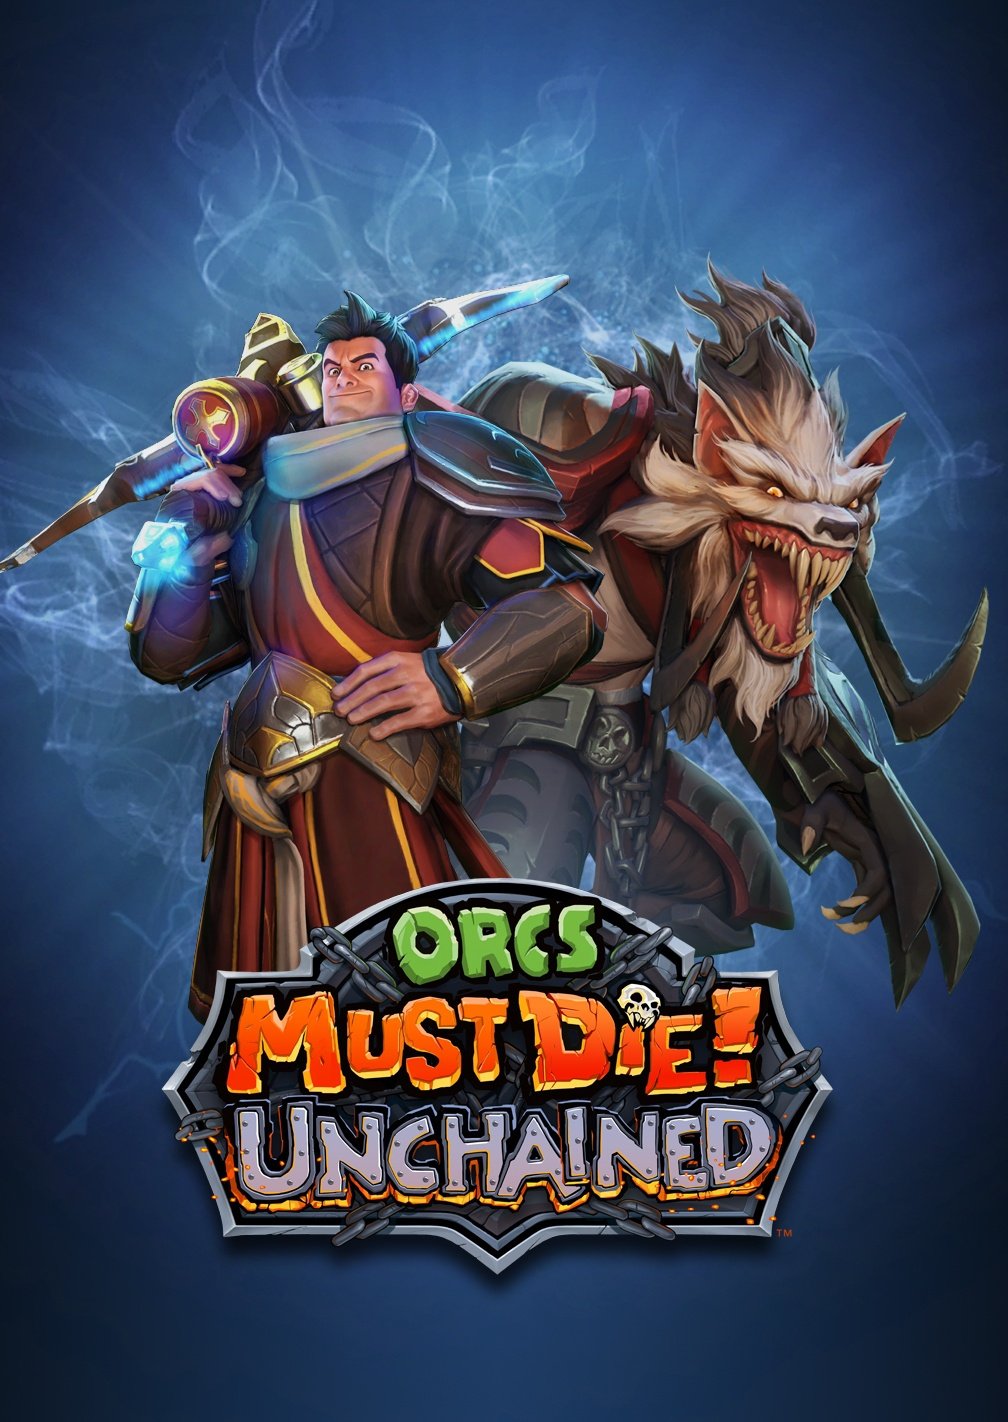 Image of Orcs Must Die! Unchained